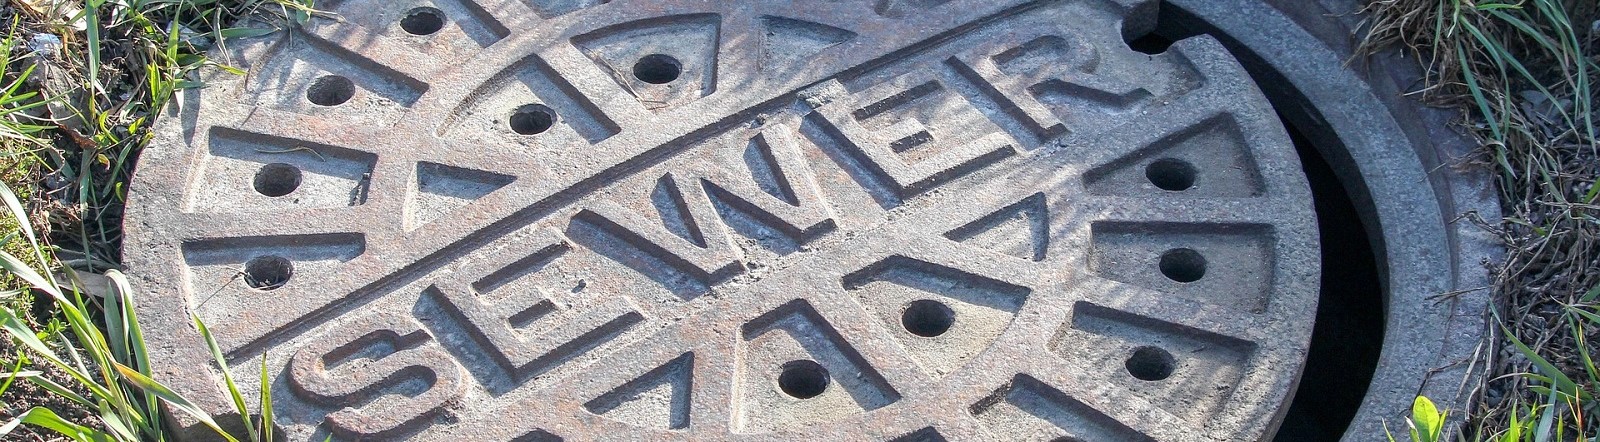 Image by Greg Reese from Pixabay of sewer